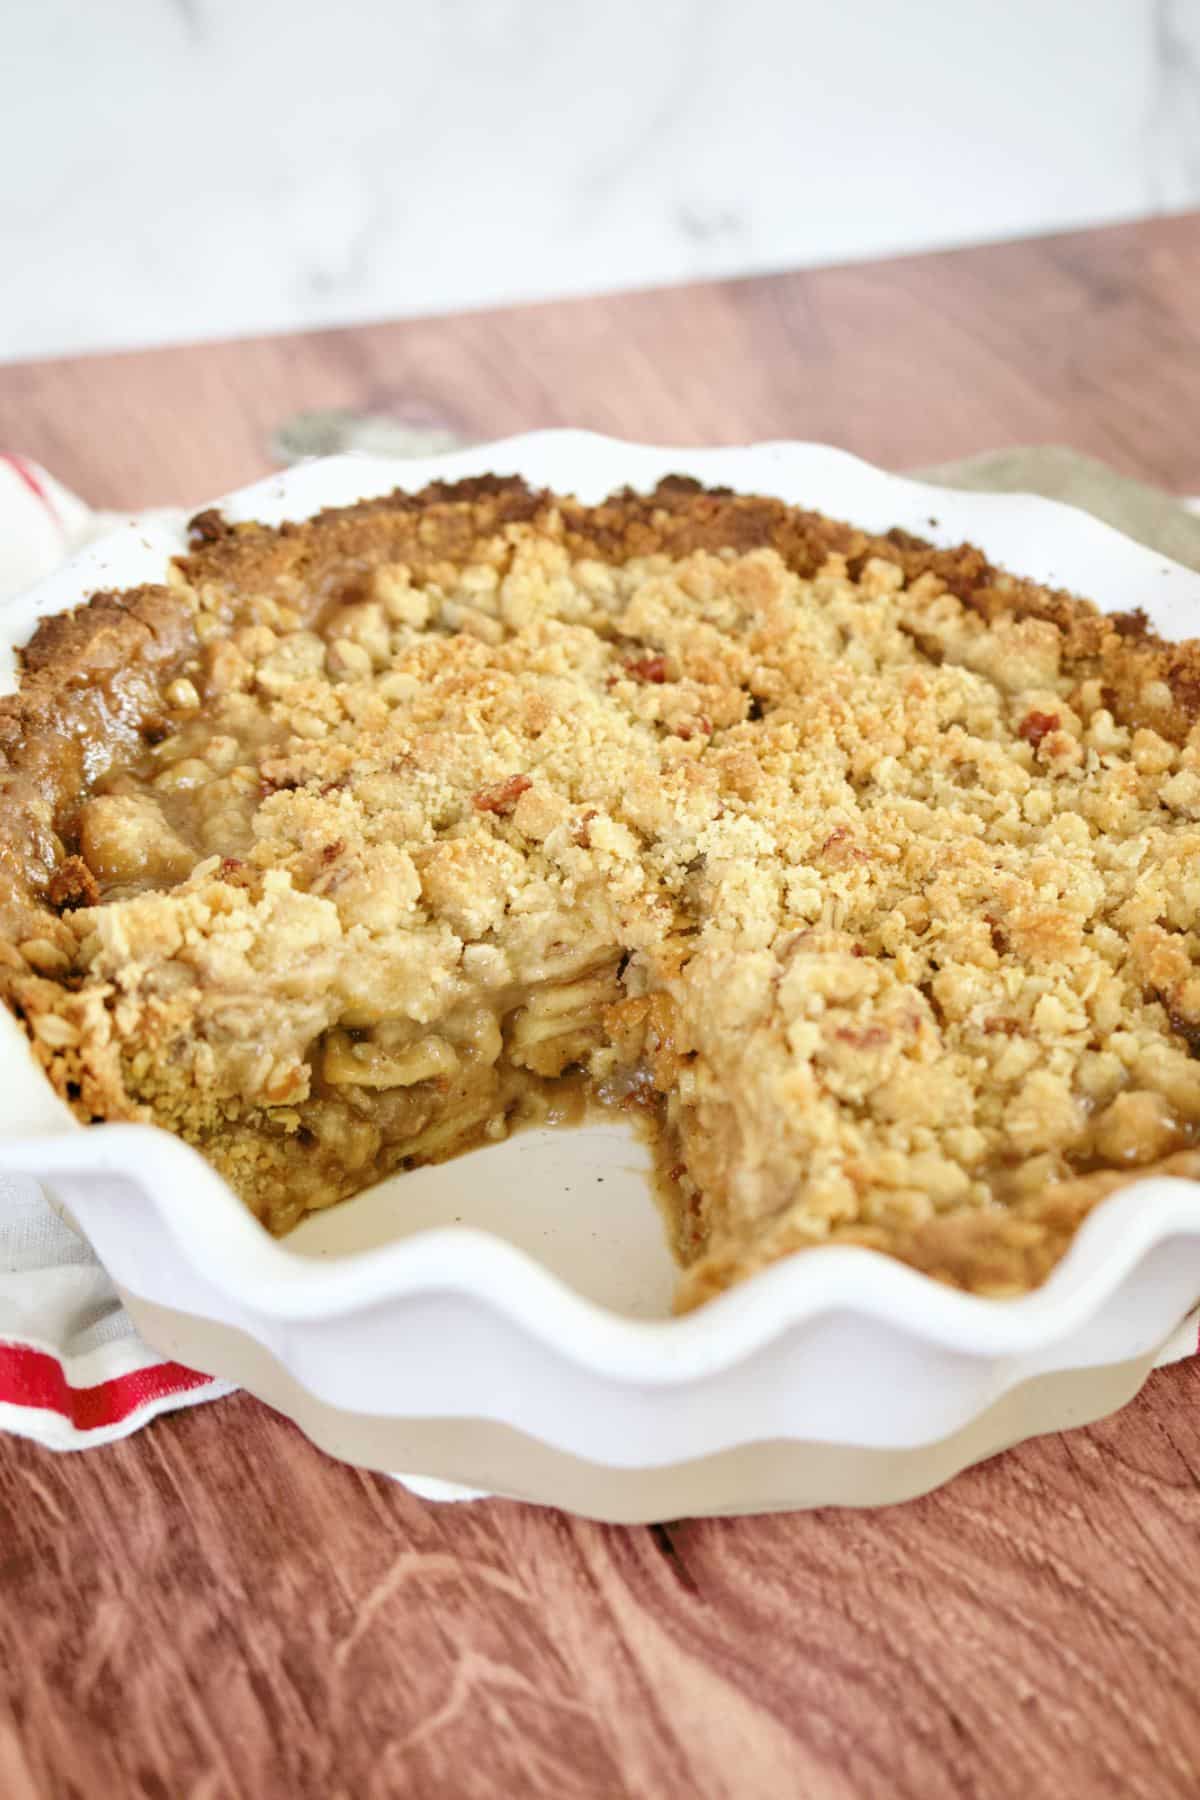 Gluten free apple pie in oven safe dish with slice removed.